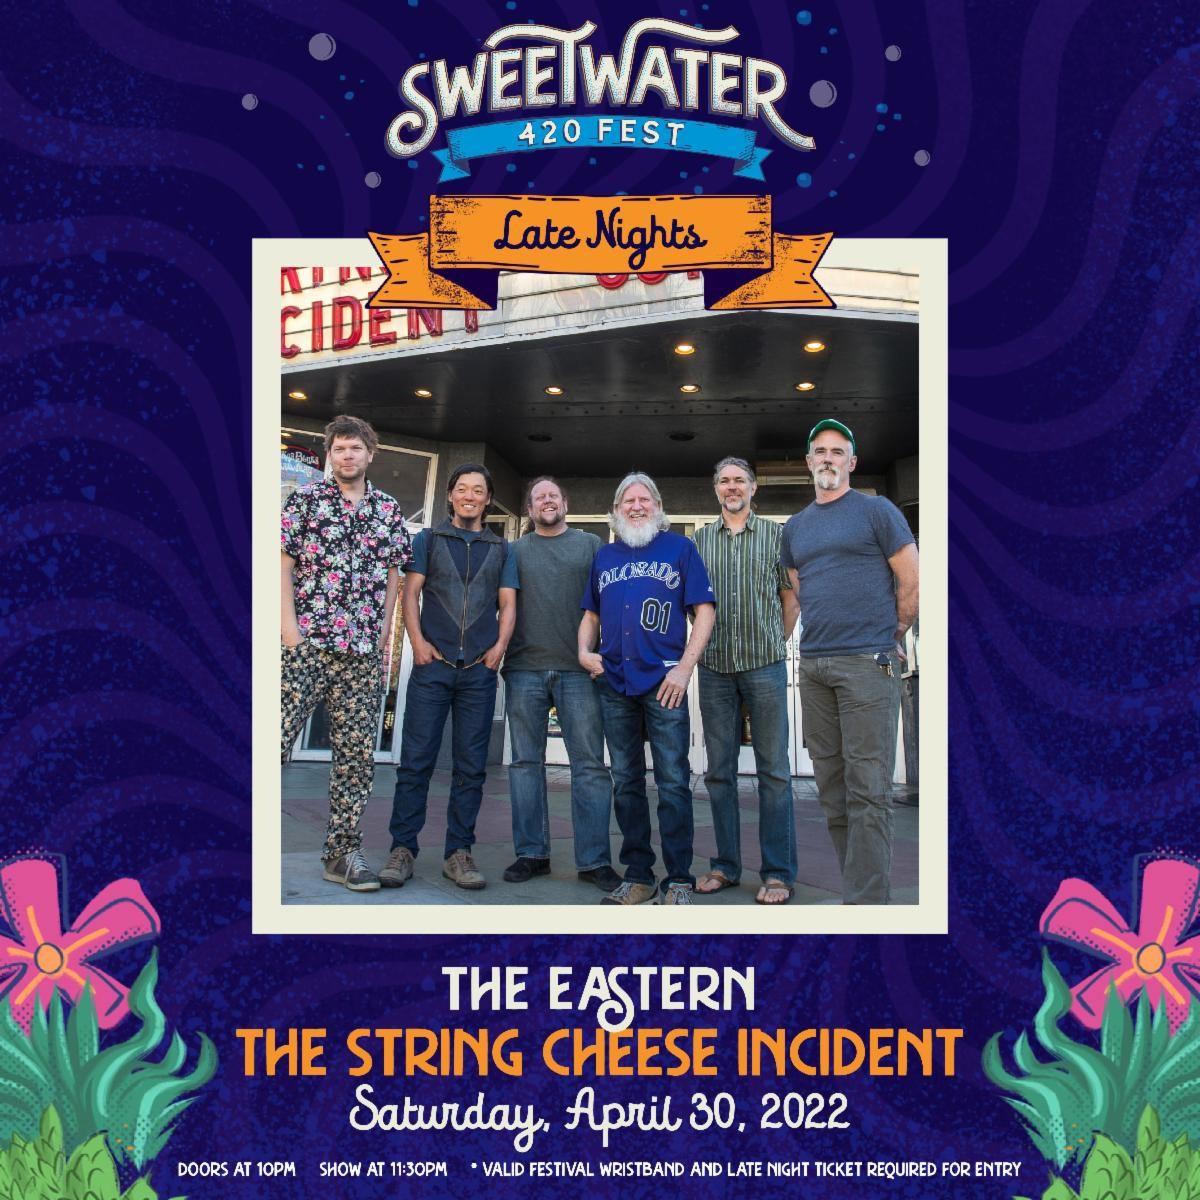 The String Cheese Incident announces intimate late night set at SweetWater 420 Fest